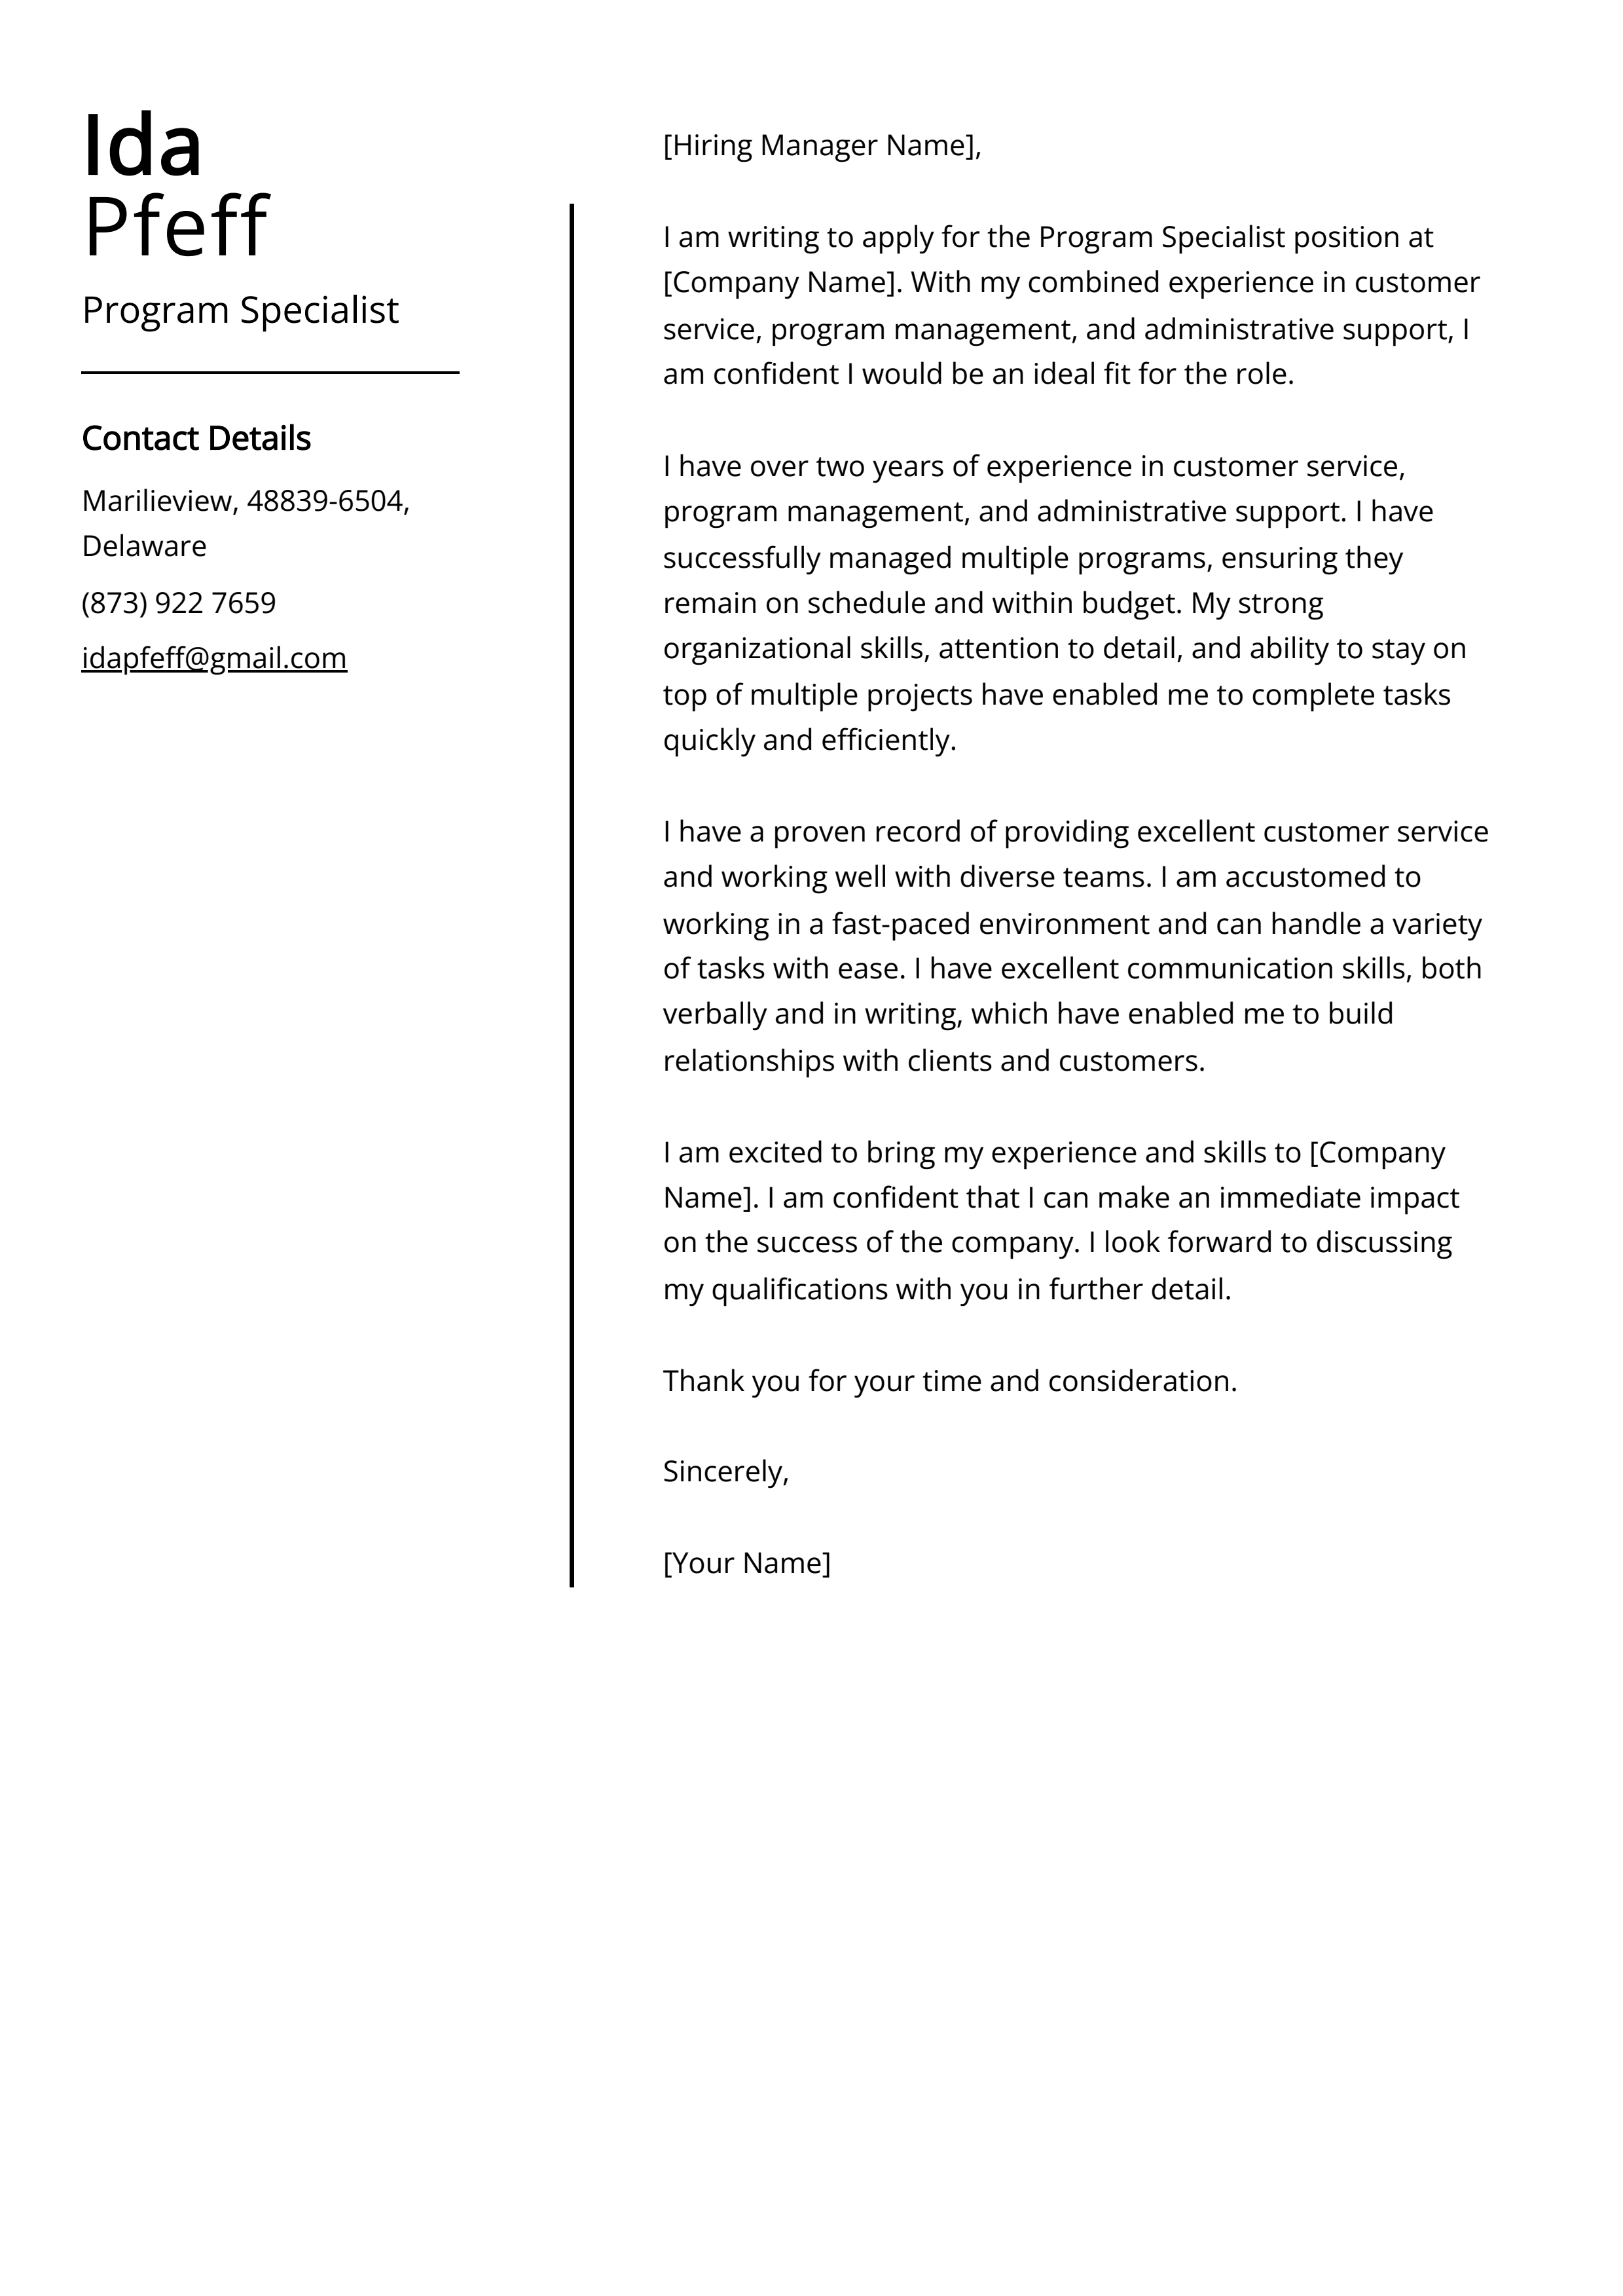 Program Specialist Cover Letter Example